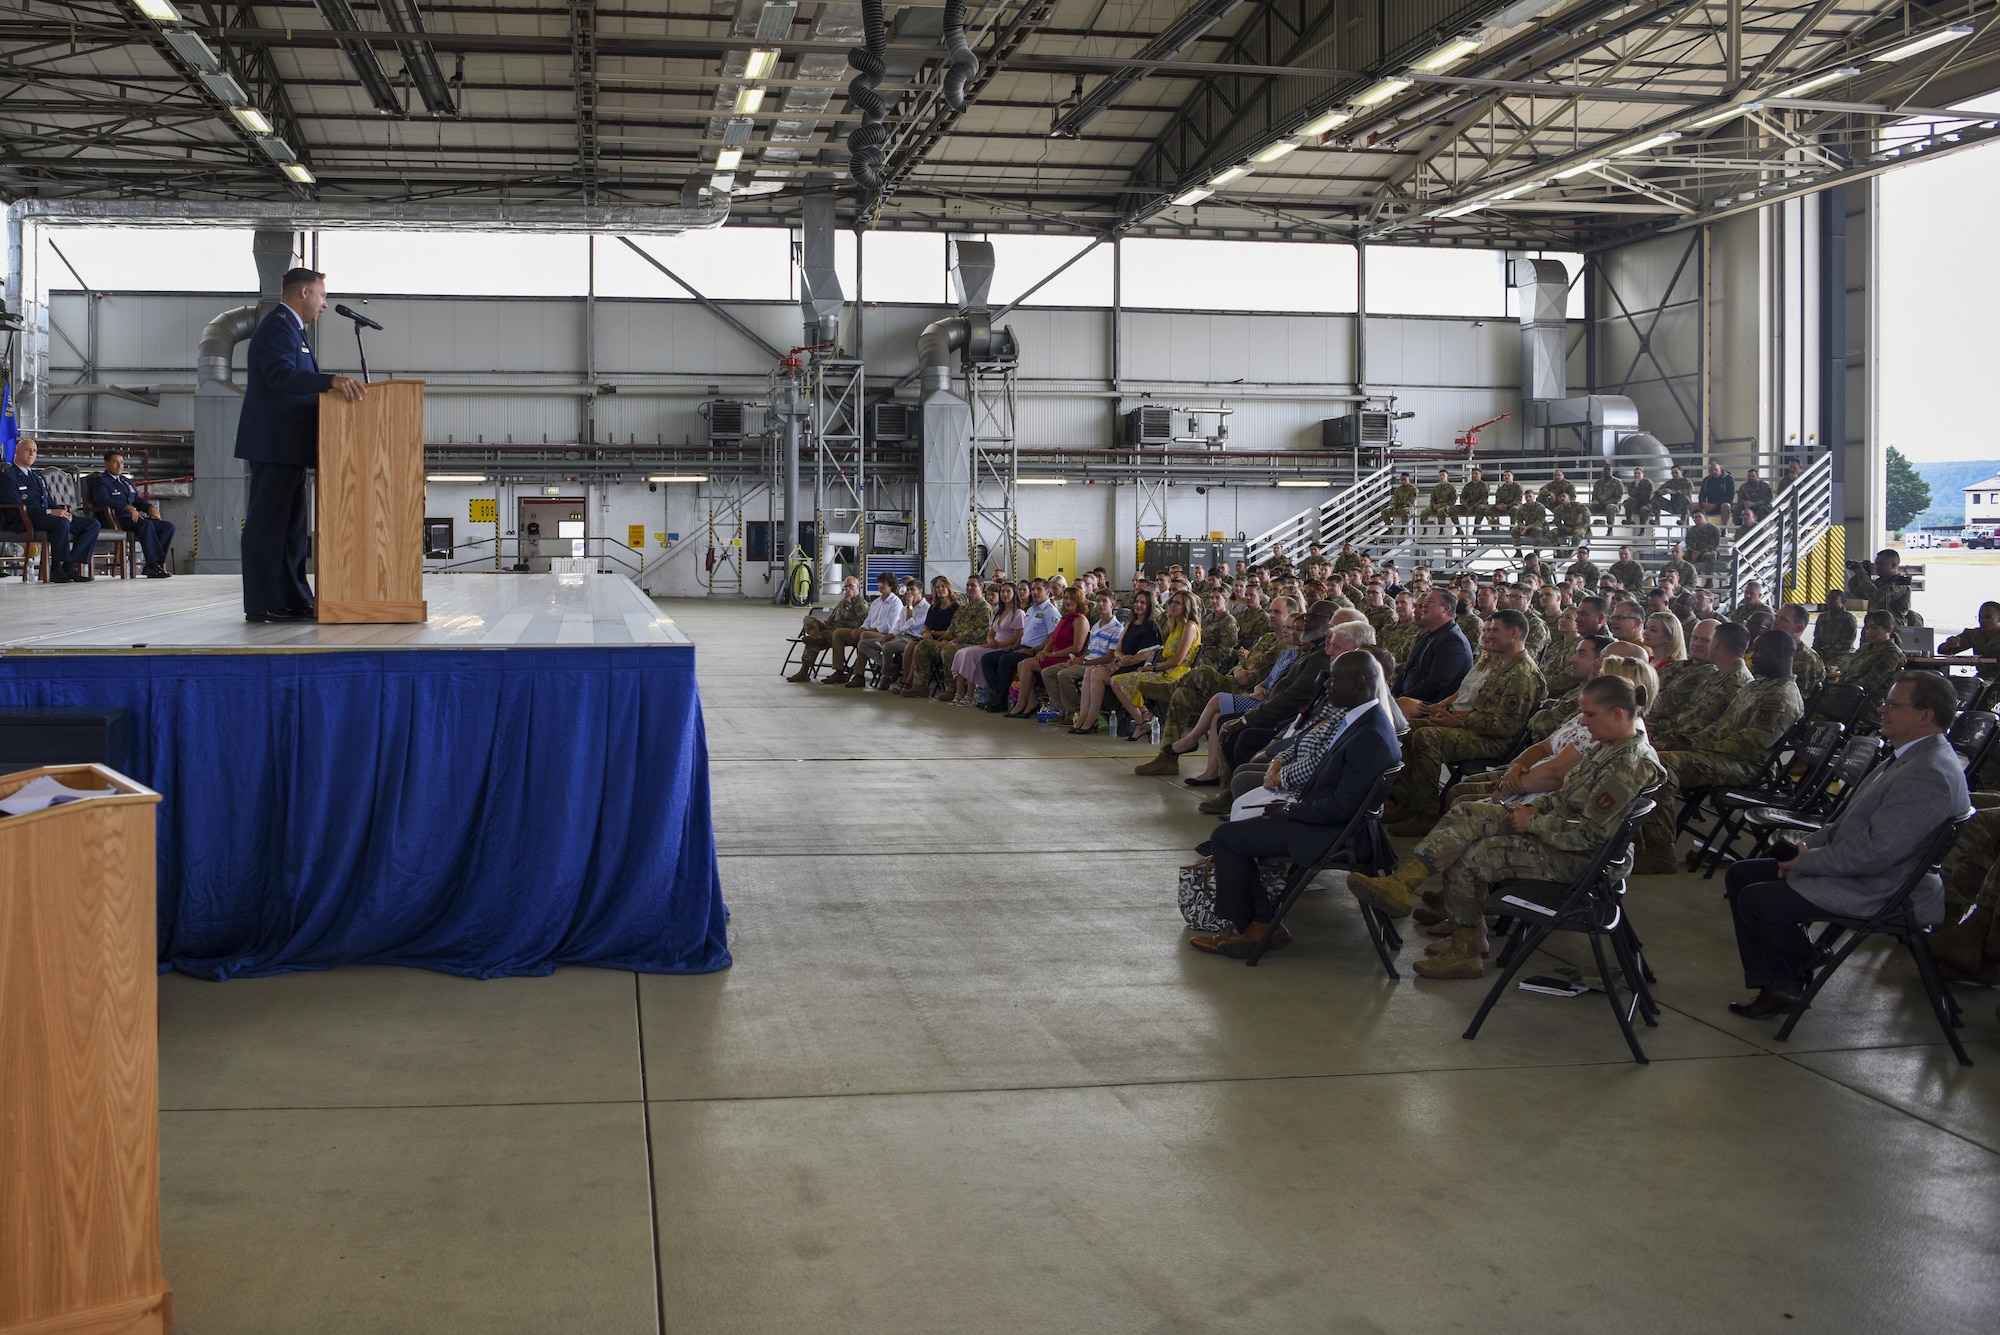 U.S. Air Force Col. Anthony M. Nance, 86th Maintenance Group outgoing commander, gives a speech during the 86 MXG change of command ceremony at Ramstein Air Base, Germany, July 13, 2022.